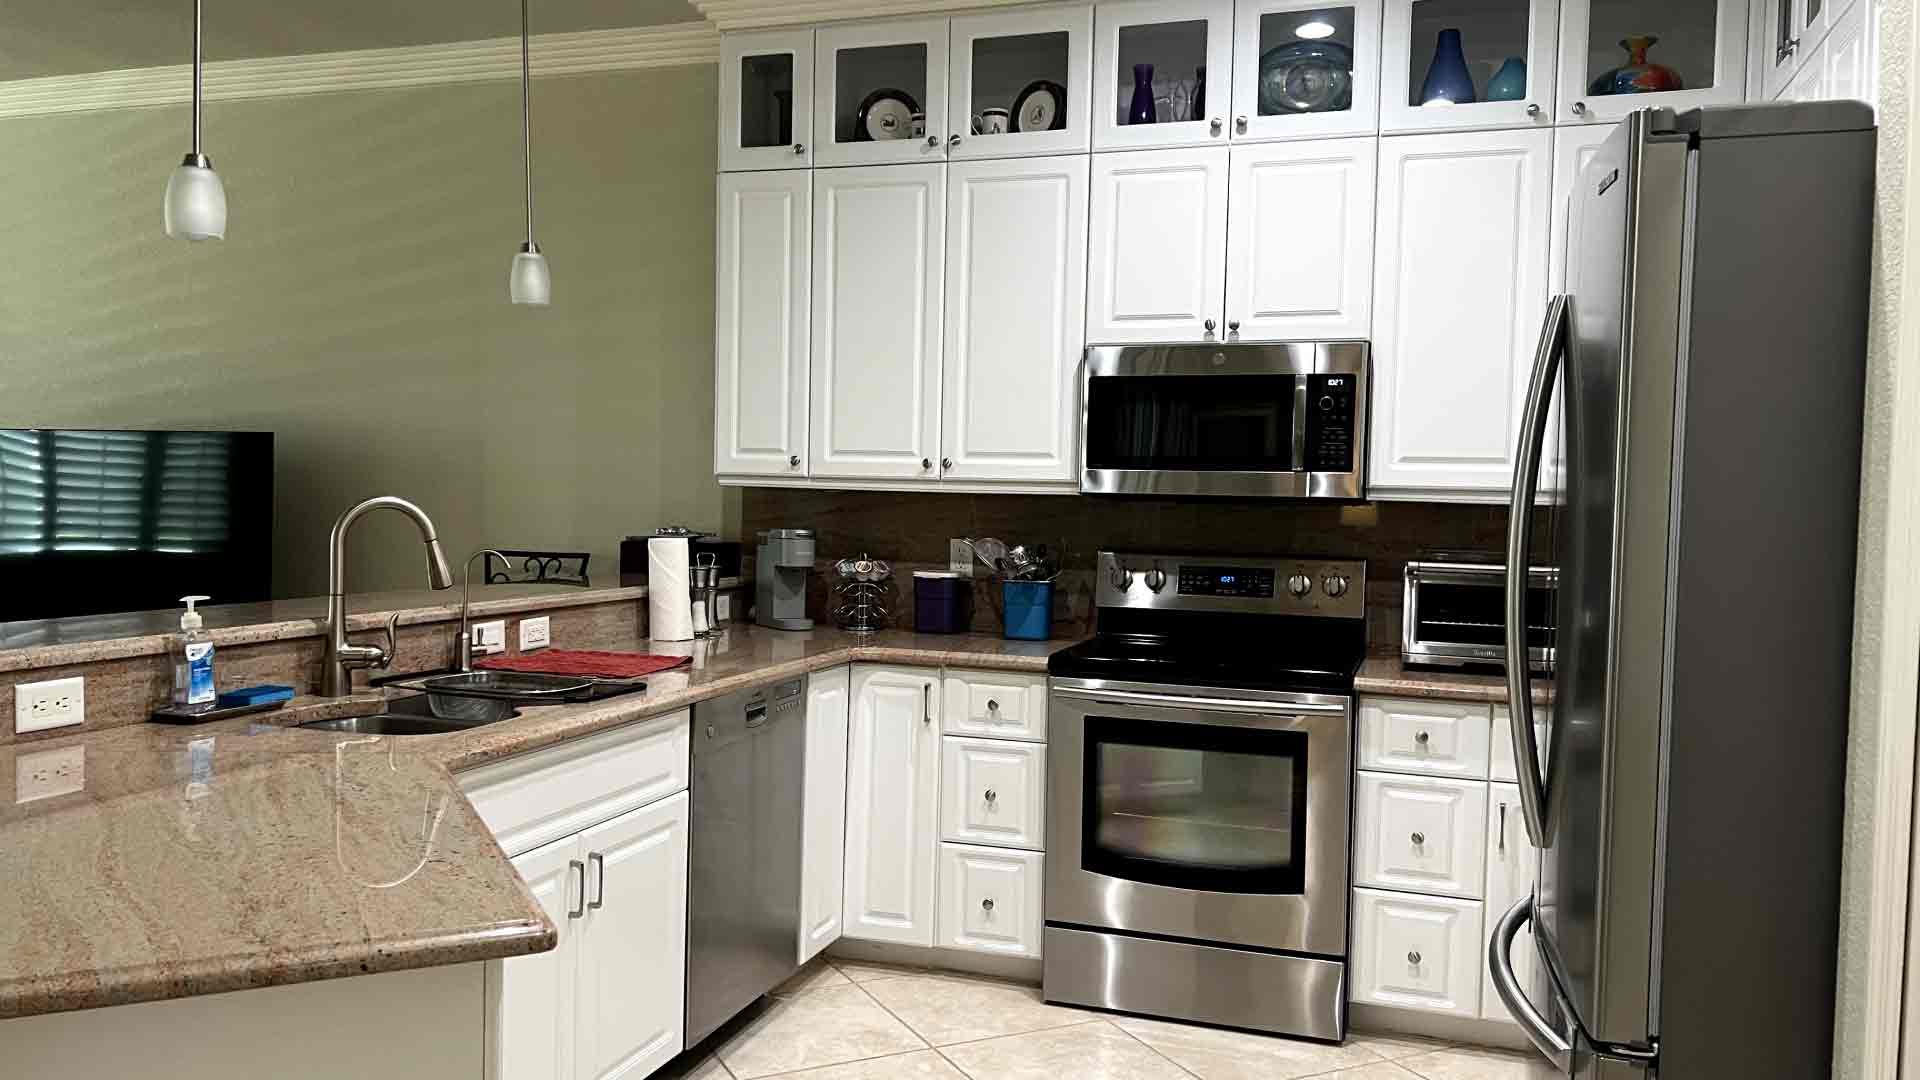 Kitchen - Regular cleaning in Cape Coral by Goldmillio - May 7